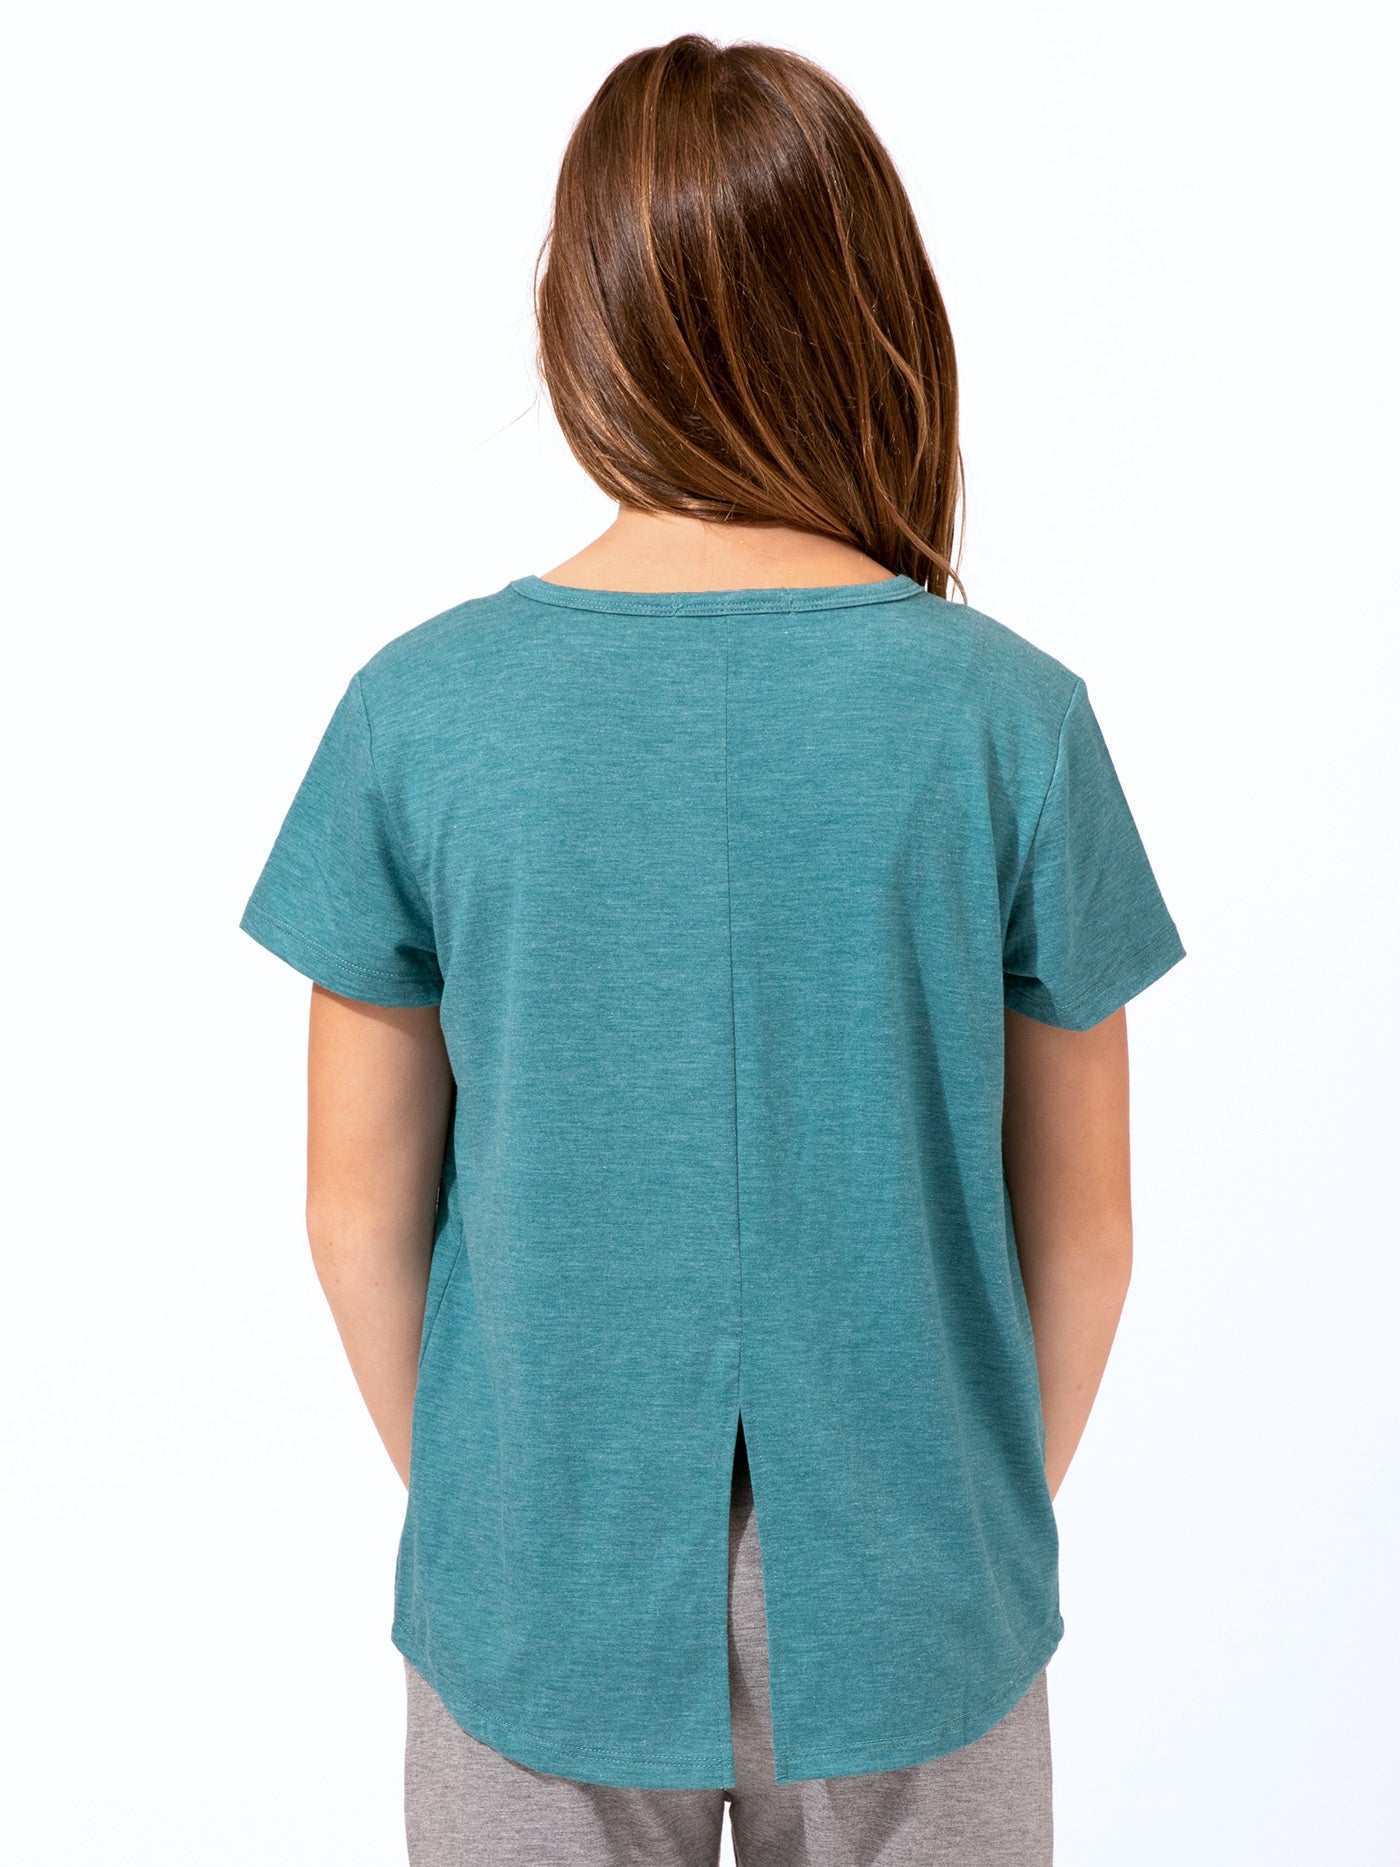 Kerry Split Back Tee Girls Tops Threads 4 Thought 